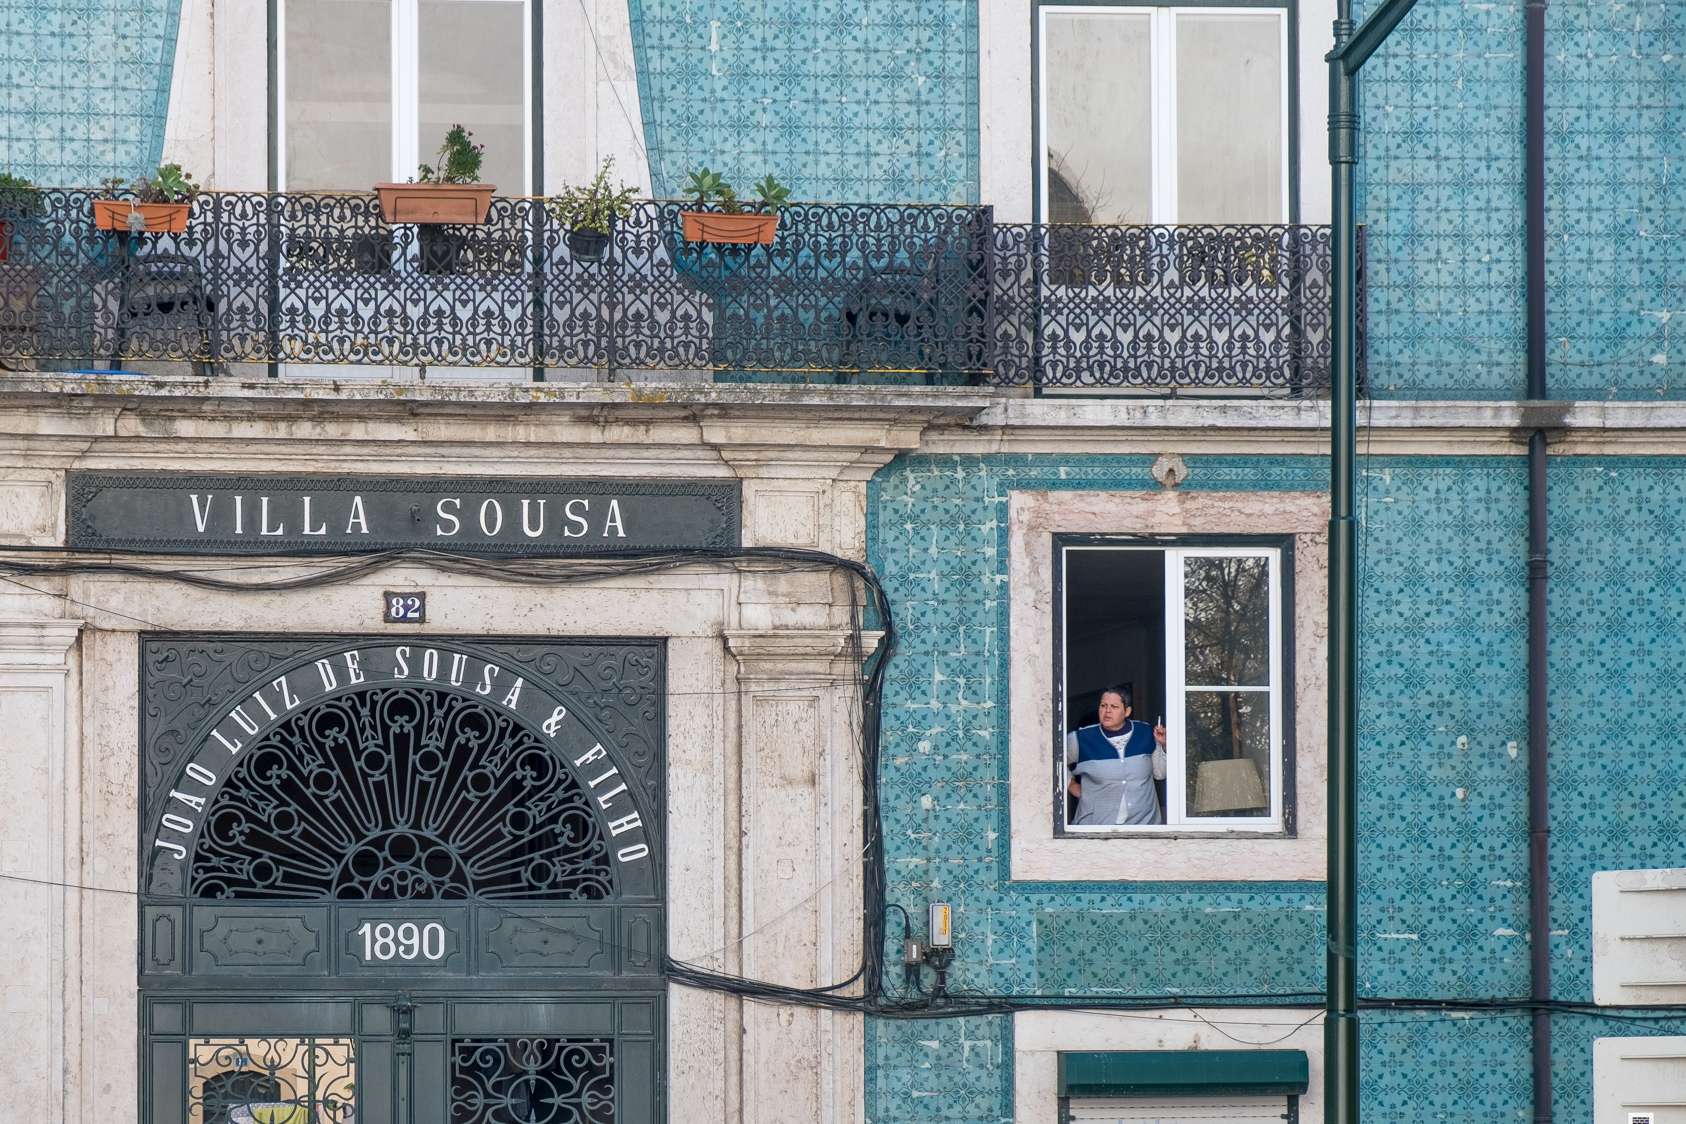 Tracing trams to find Lisbon’s liveliest lookouts